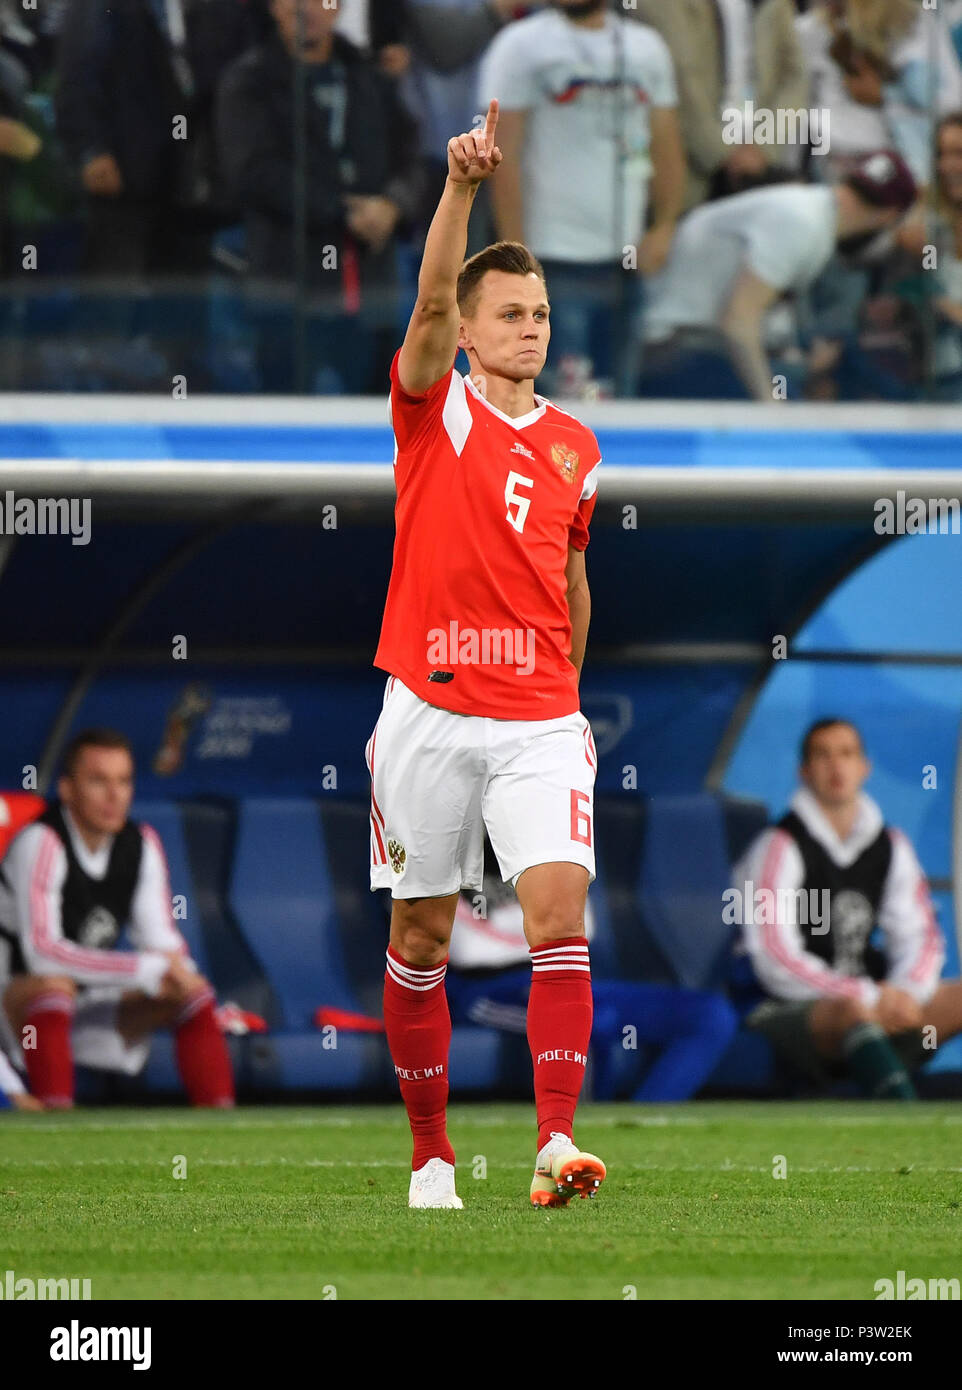 Saint Petersburg, Russia. 19th June, 2018. Denis Cheryshev of Russia celebrates scoring during a Group A match between Russia and Egypt at the 2018 FIFA World Cup in Saint Petersburg, Russia, June 19, 2018. Credit: Li Ga/Xinhua/Alamy Live News Stock Photo